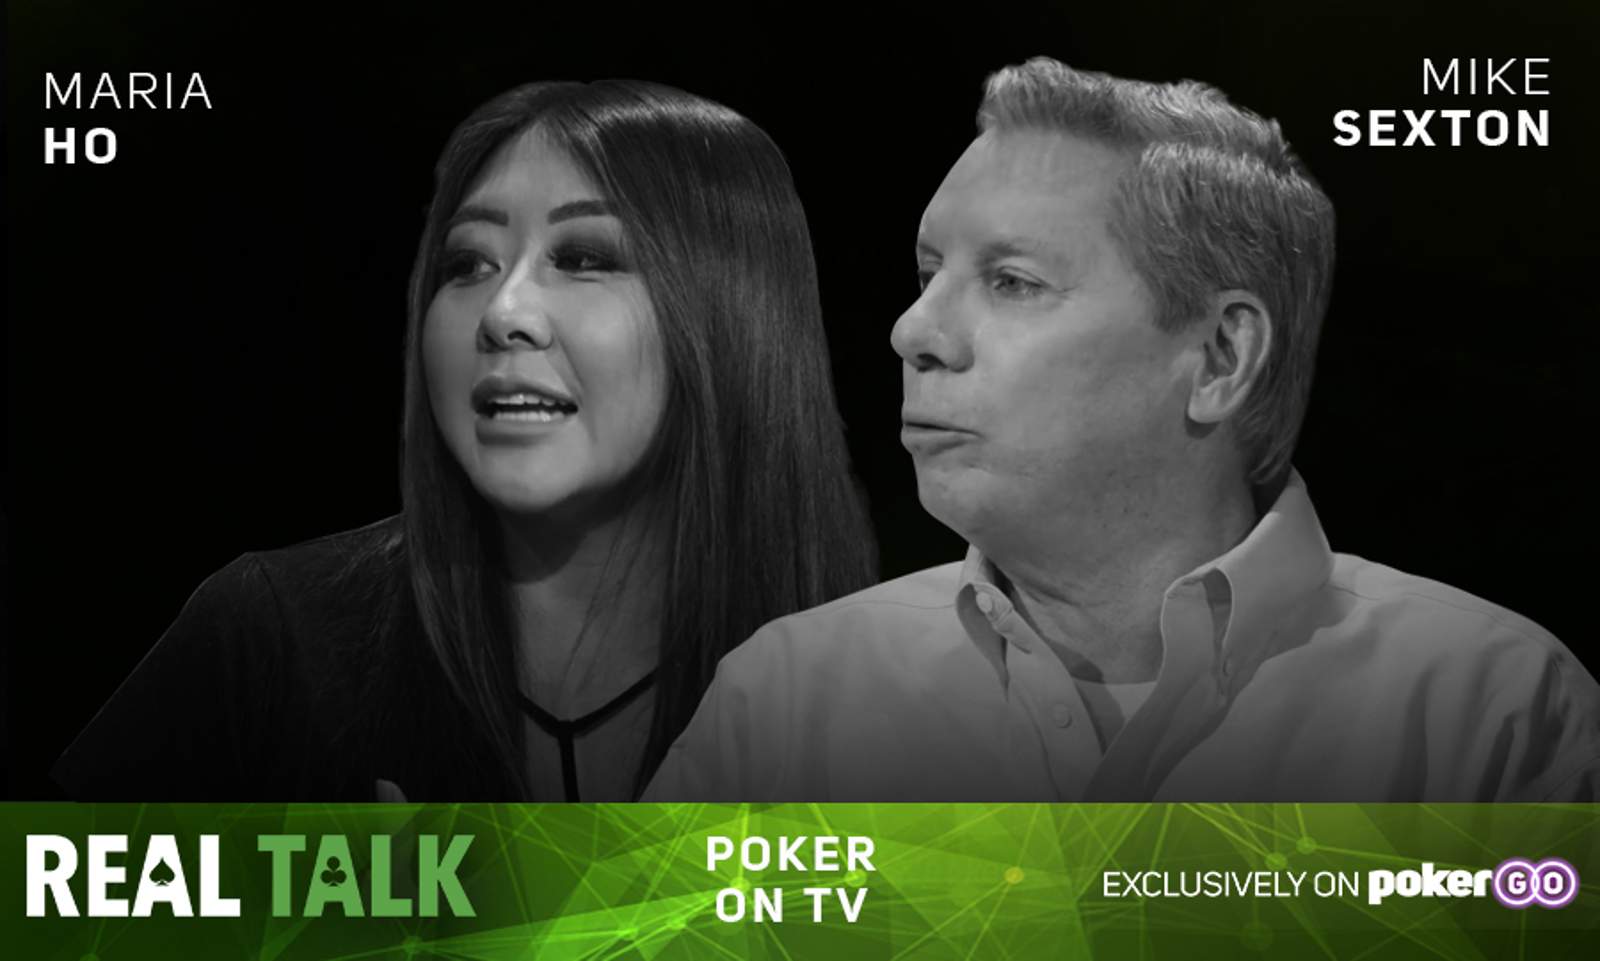 Real Talk - Mike Sexton and Maria Ho Talk Poker on TV